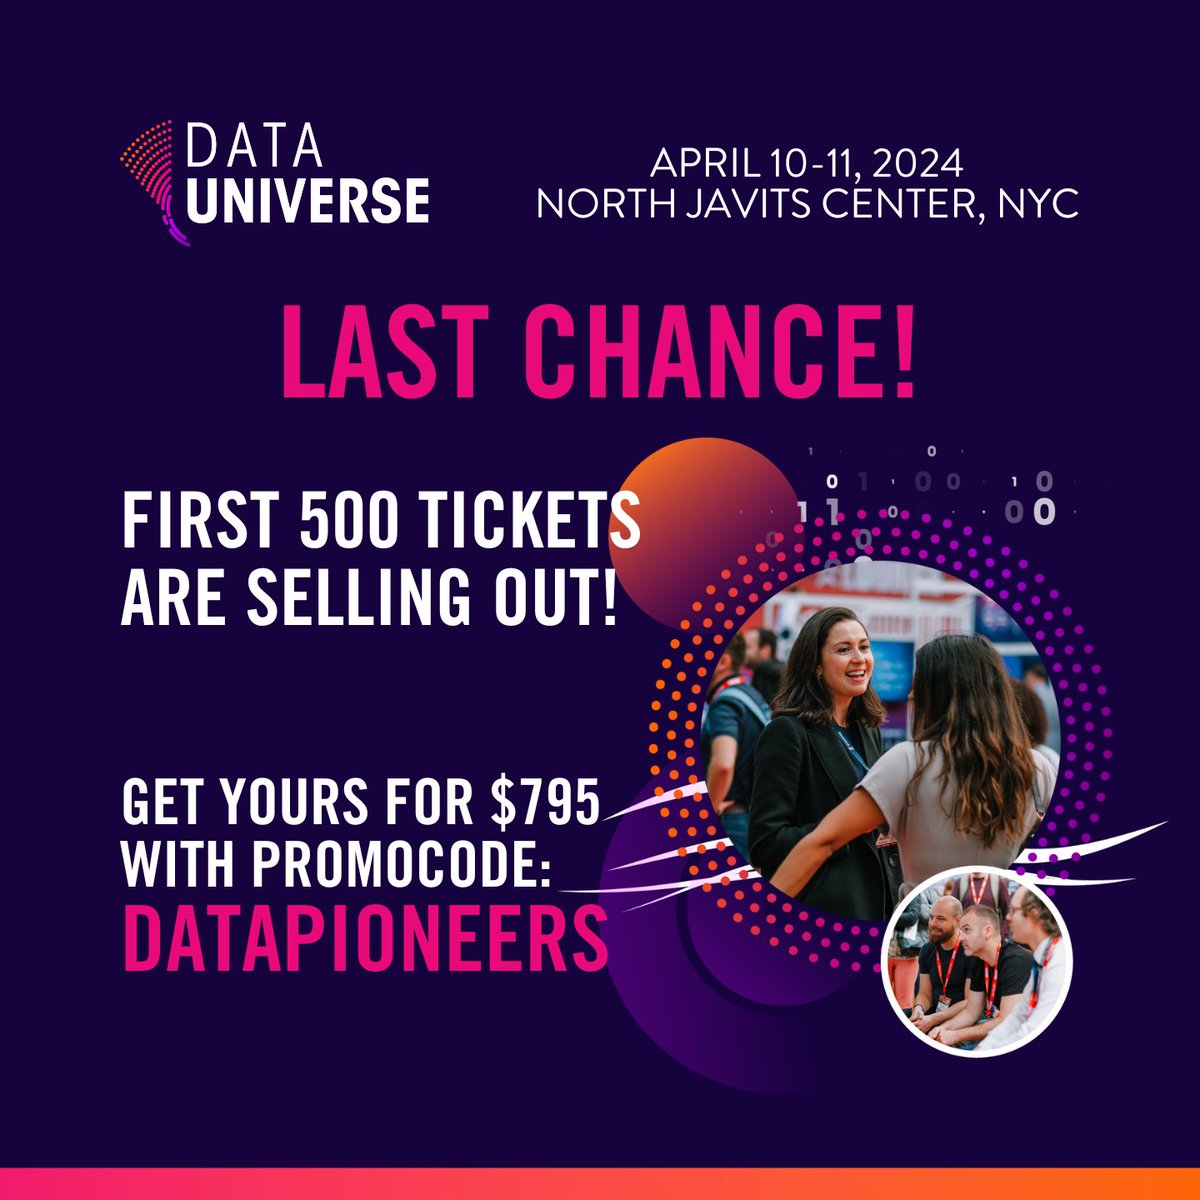 ⏰ Time is running out on this offer! Grab your ticket to #DataUniverse2024 with code DATAPIONEERS at checkout. Join 250+ #data & #AI experts in #NYC on April 10-11, 2024 for groundbreaking content, networking & demos of cutting-edge data & AI products. bit.ly/3t3IylP